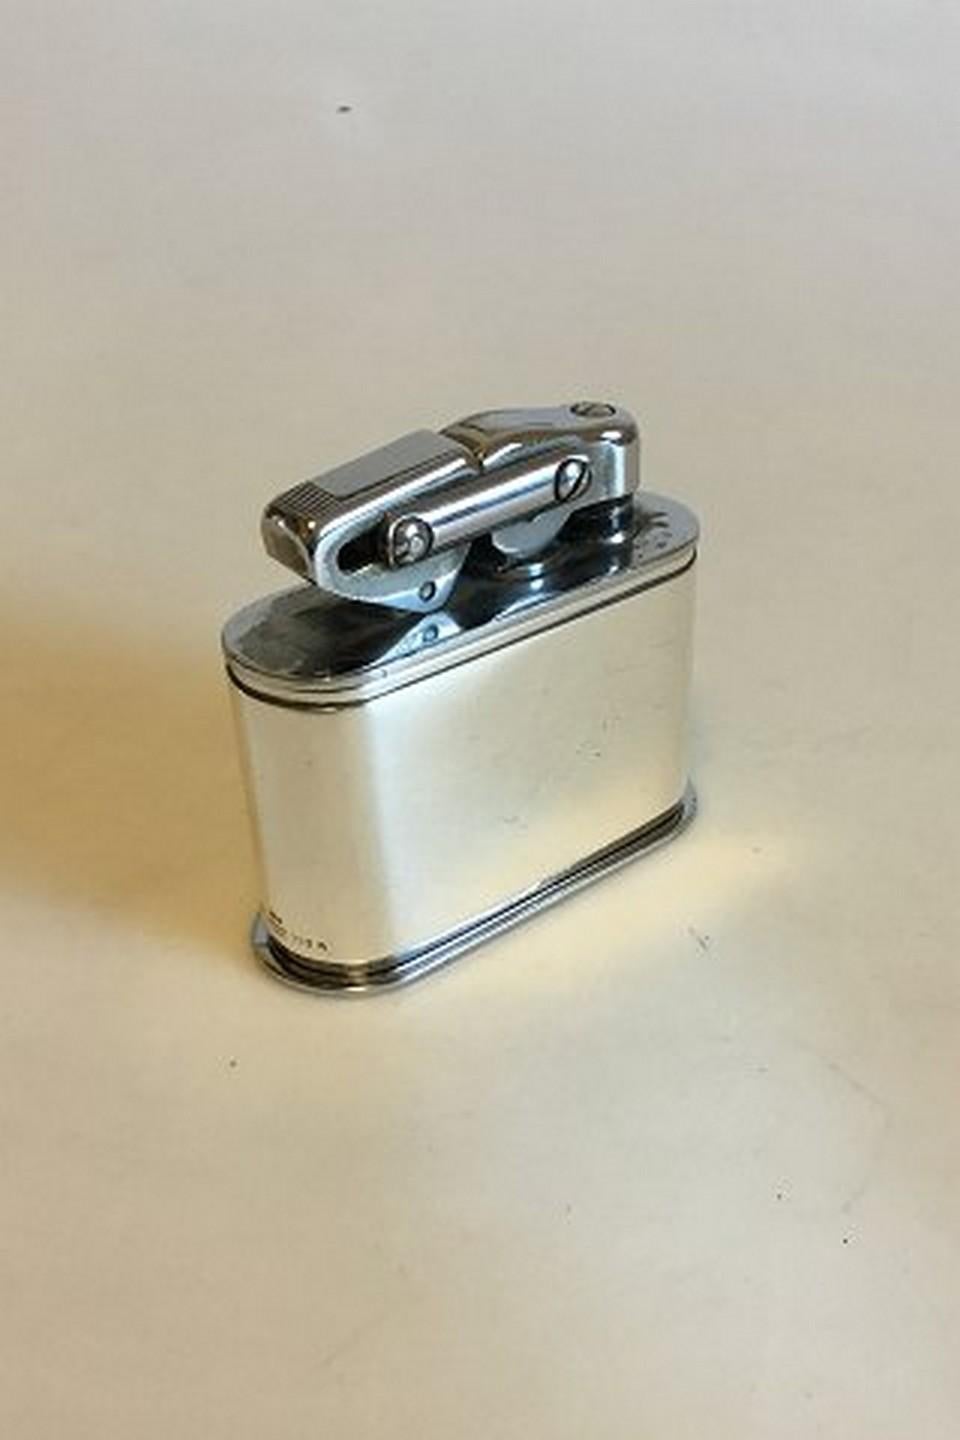 Georg Jensen sterling silver table lighter no. 203A. Measures: 8 cm / 3 5/32 in. Weighs 319 g / 11.25 oz. With Swedish Import Mark. We do not guarantee the functionality
Item no.: 351151.